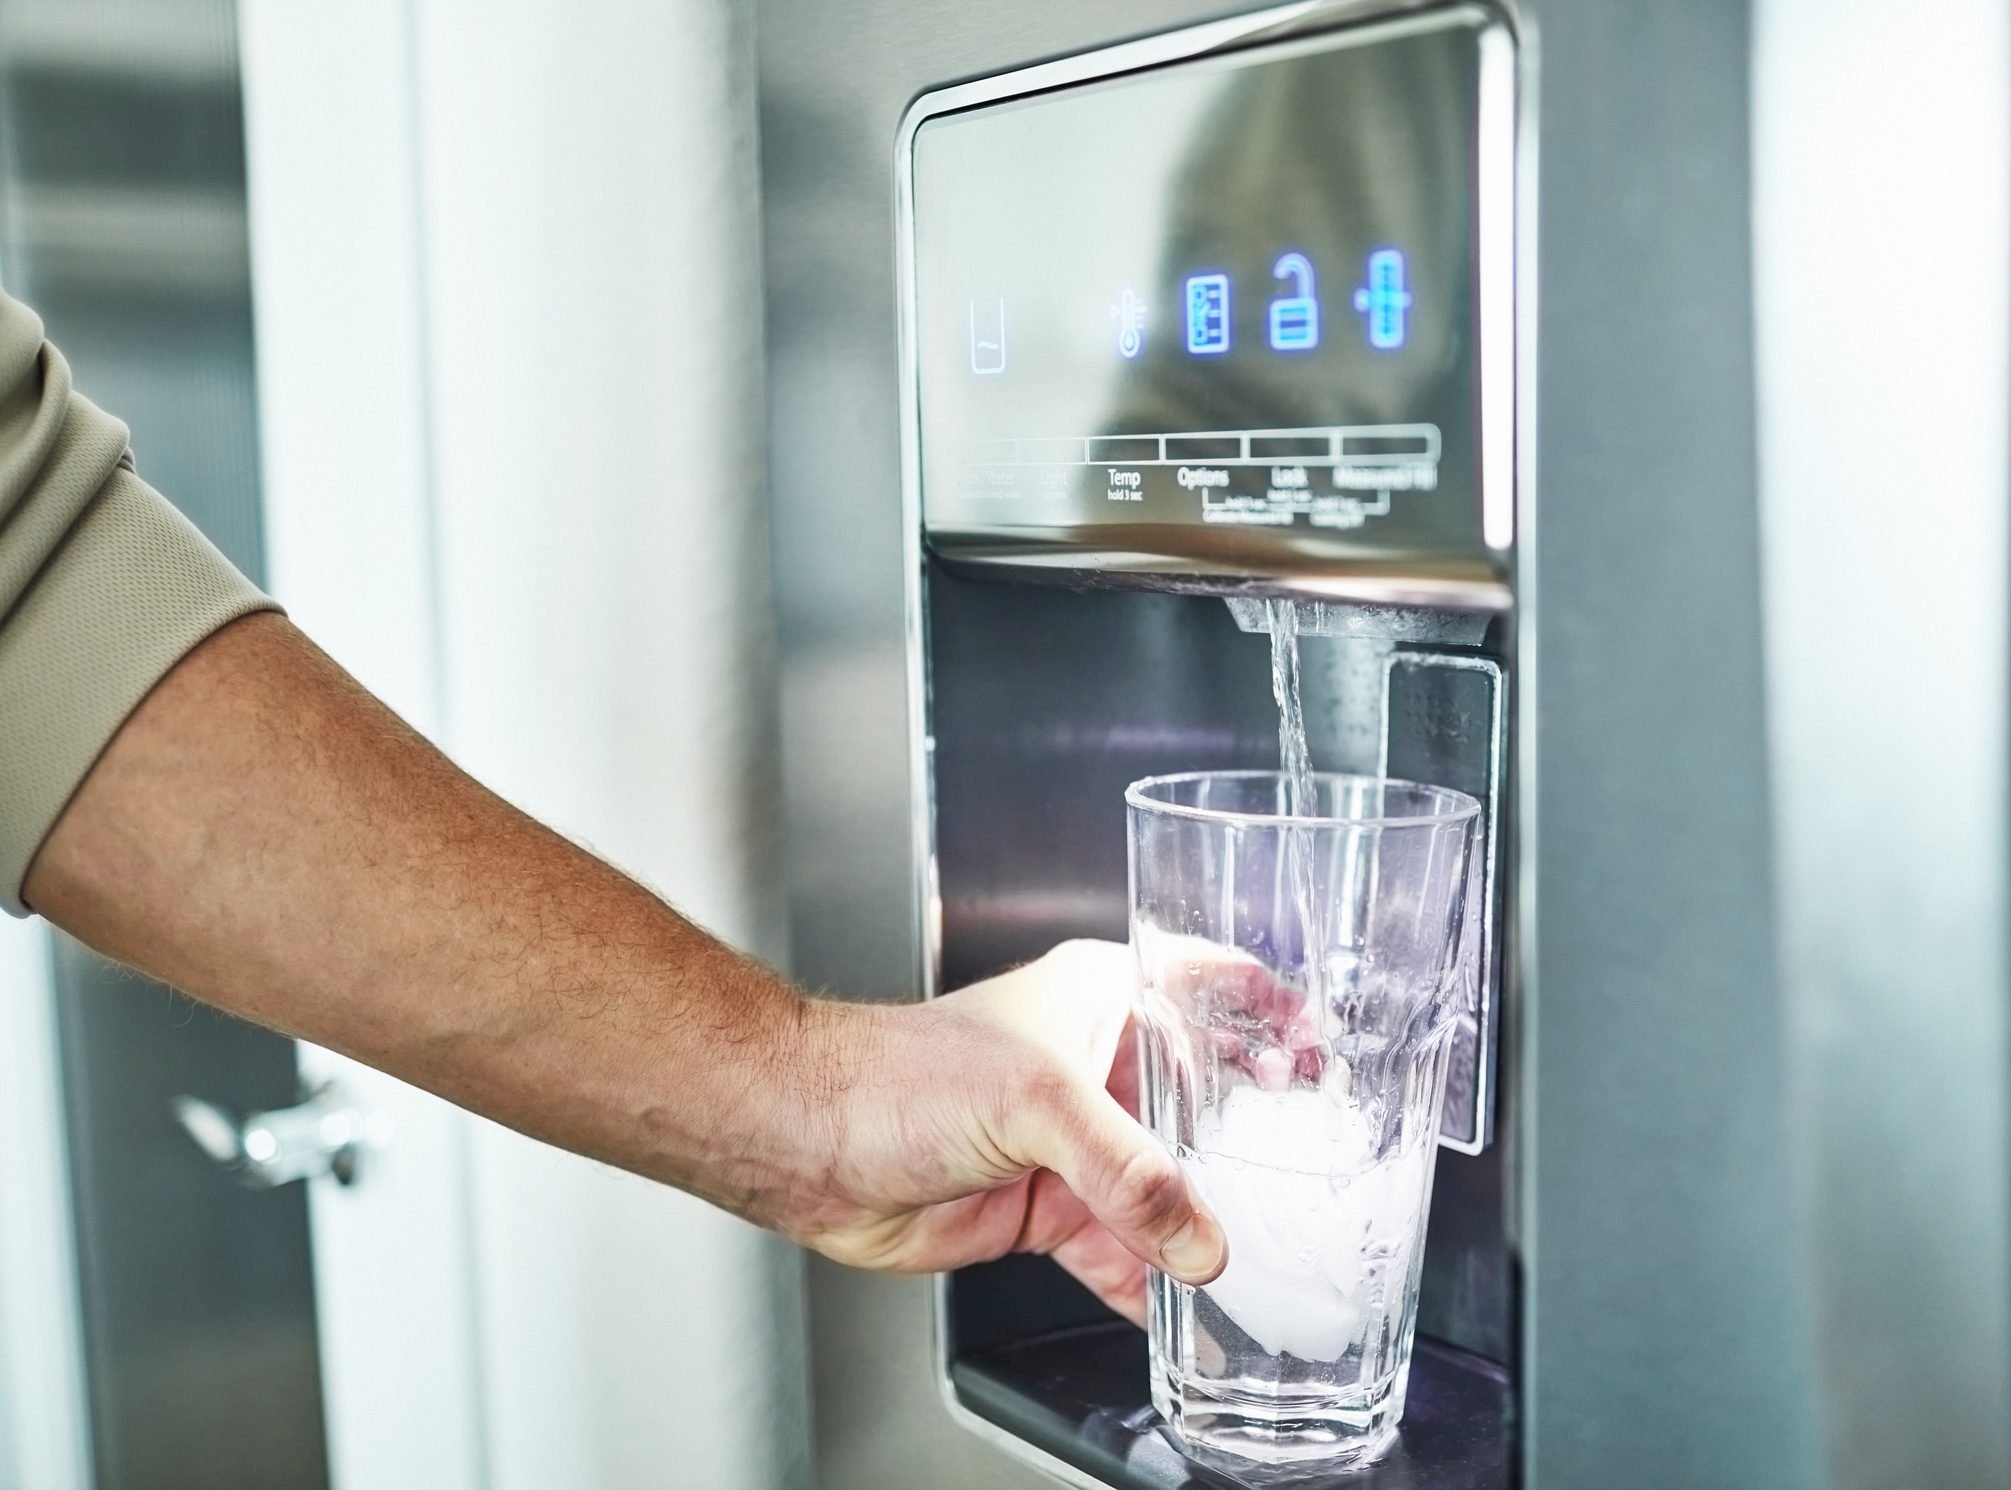 Why Is the Water From My Fridge Not Cold? | The Family Handyman